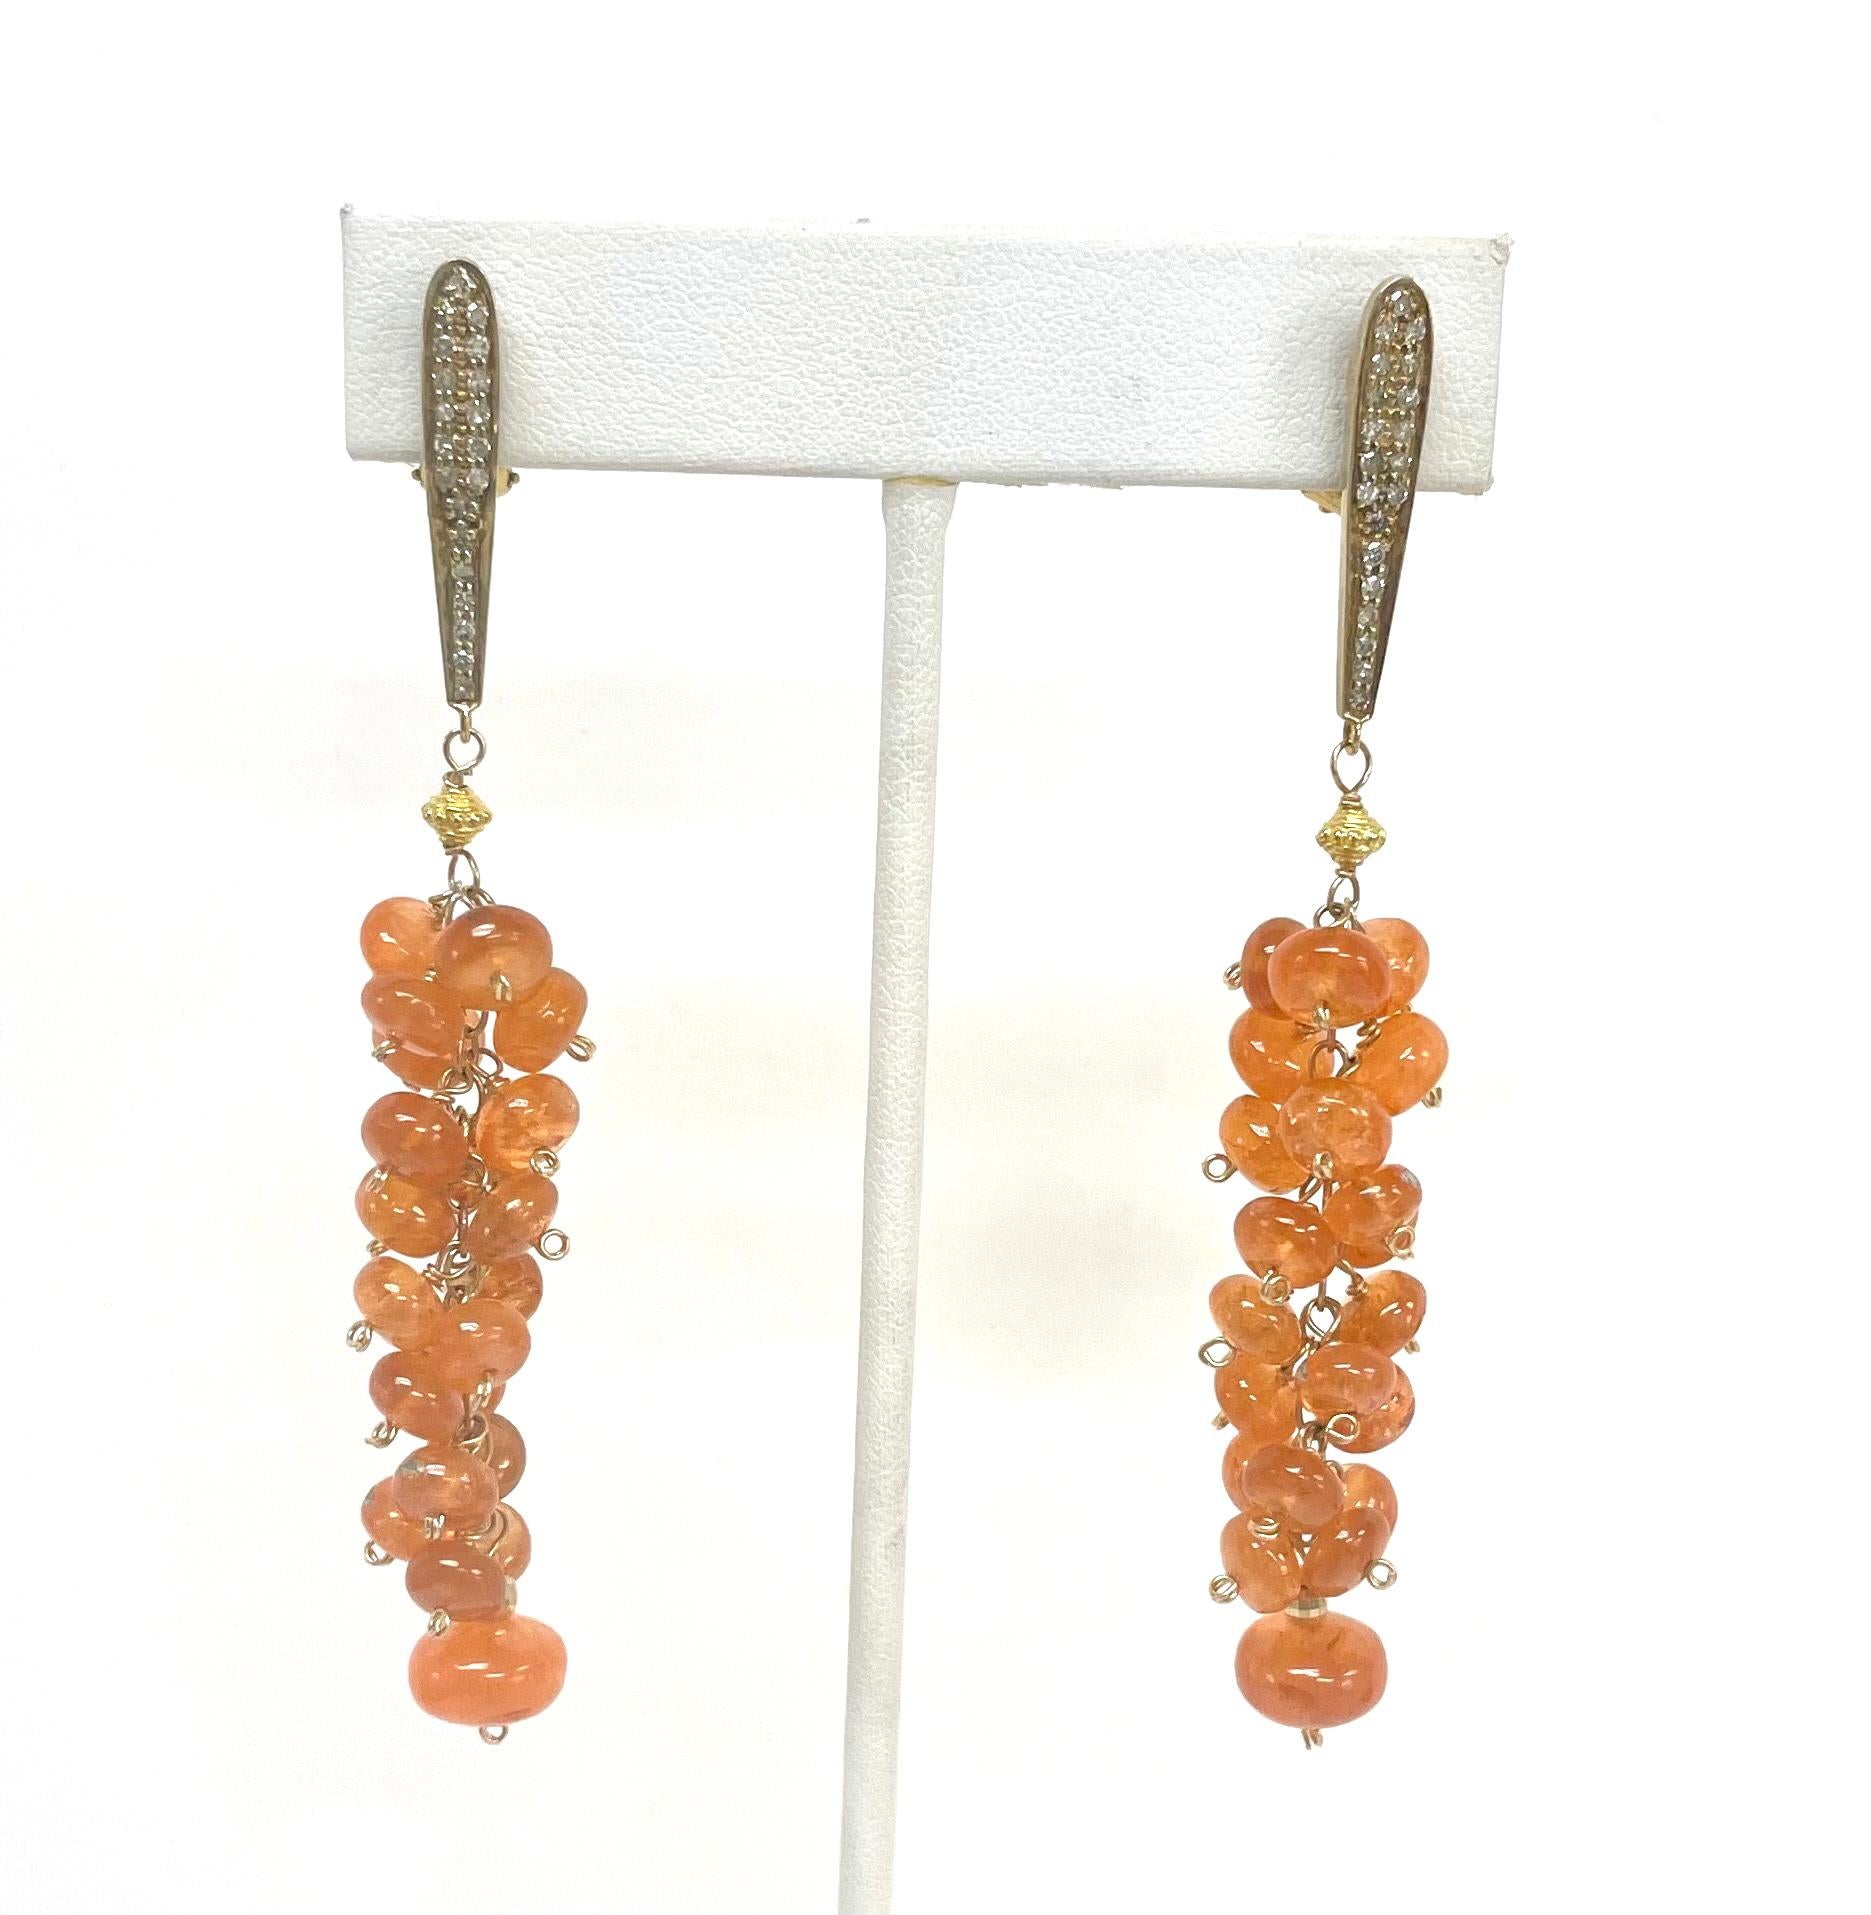 92 Carats Orange Spessartite with Gold and Diamonds Cluster Earrings For Sale 5